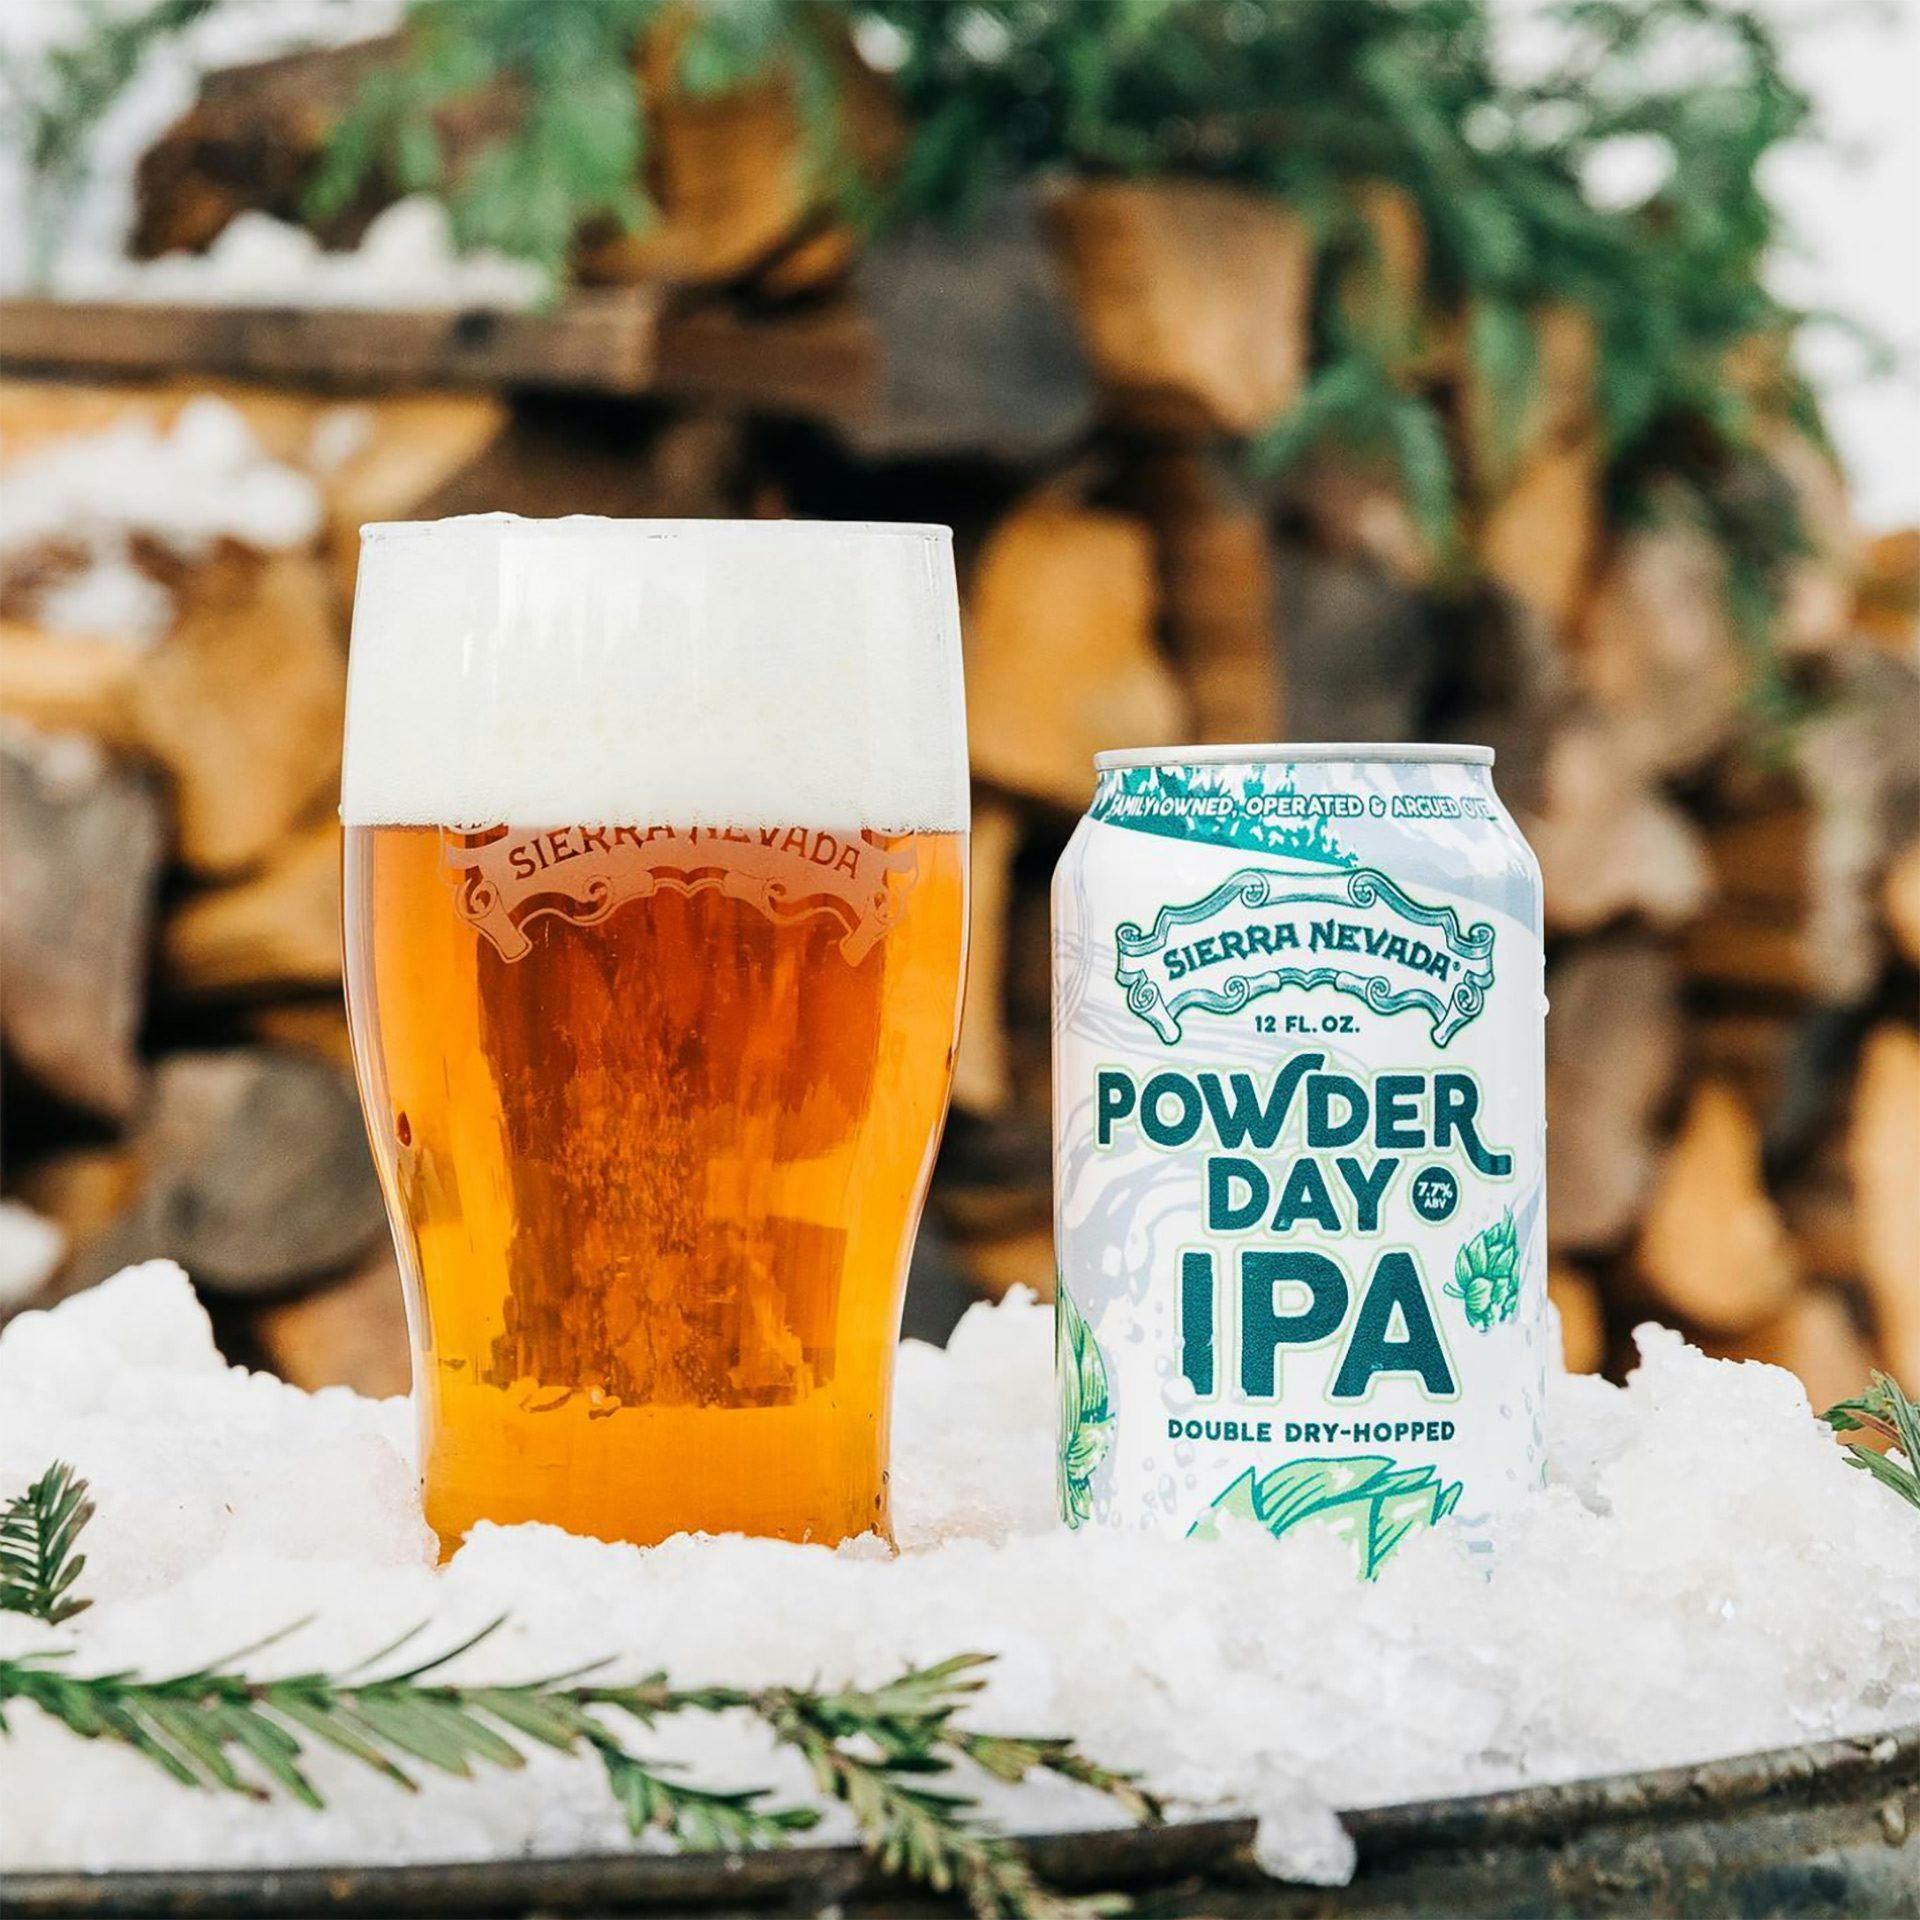 Powder Day IPA beer can and pint glass